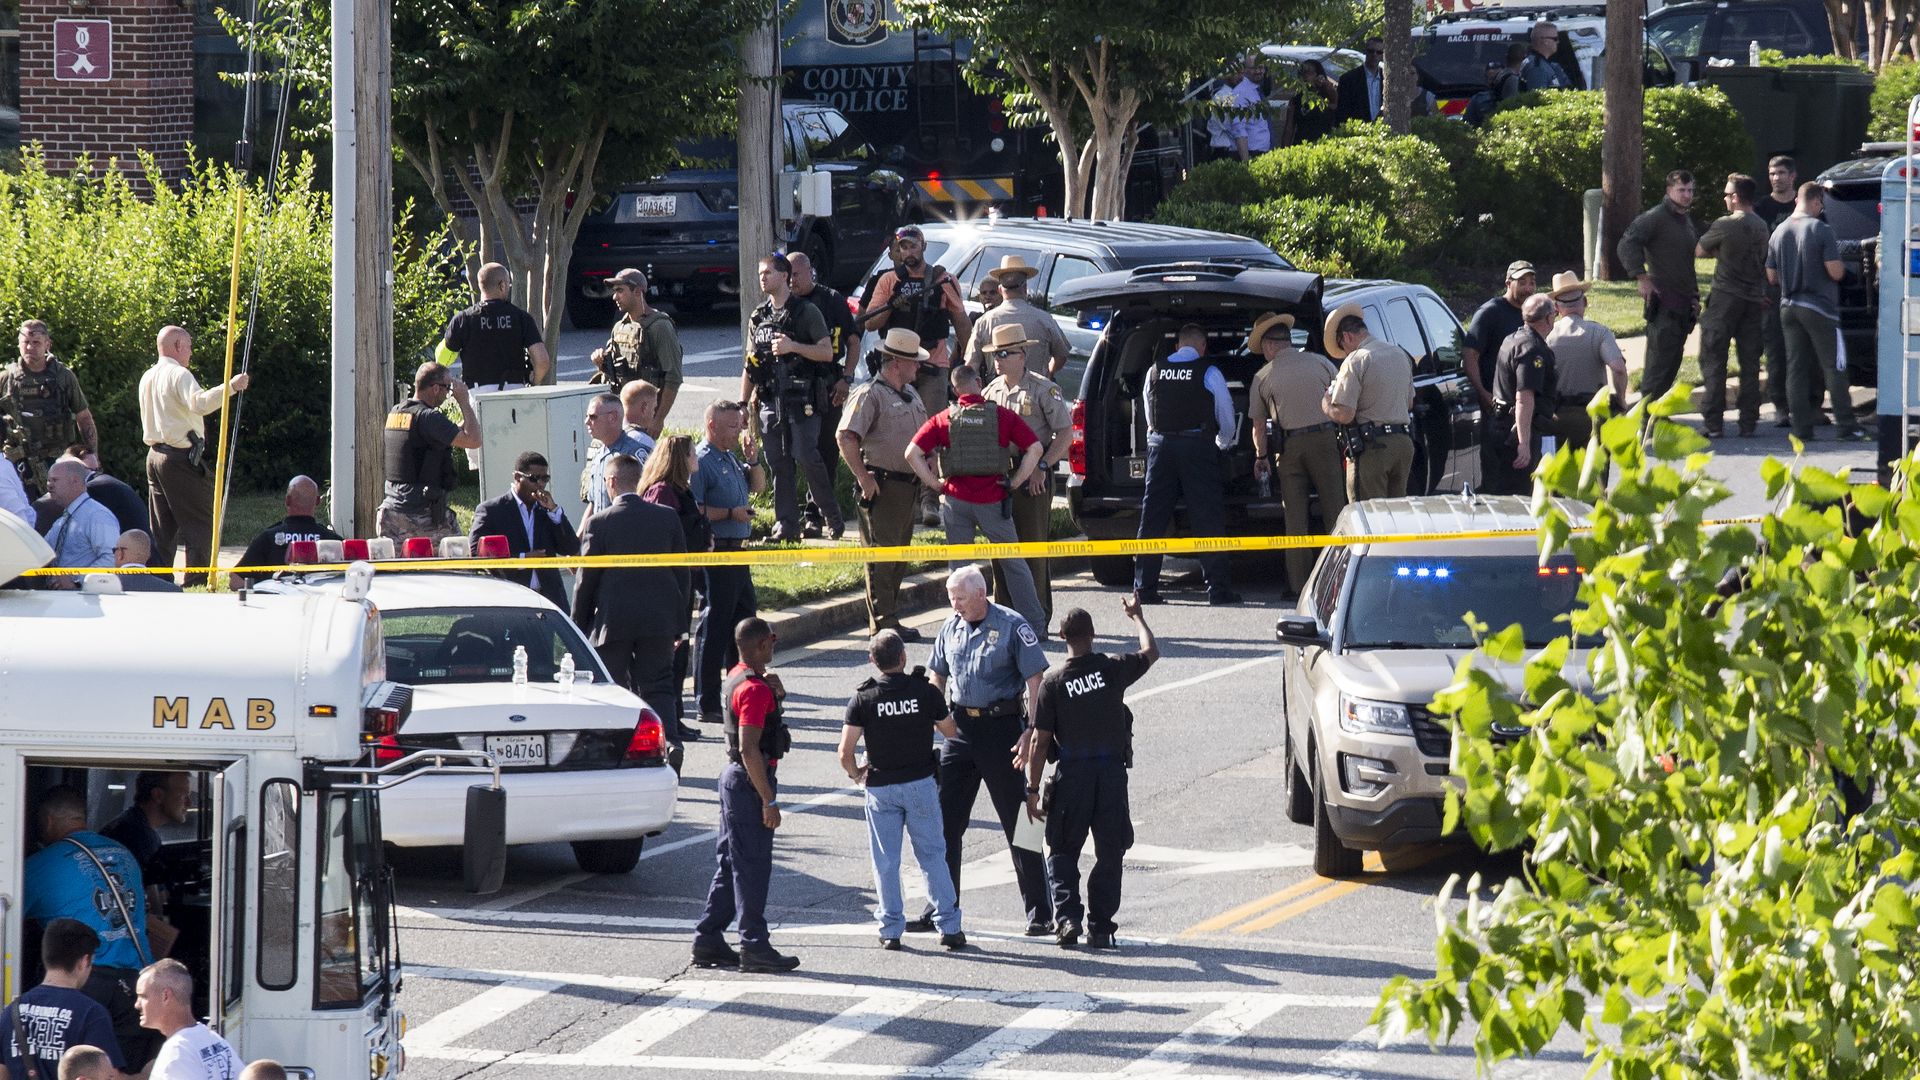 Police and press gathered on the scene of the shooting in Annapolis, Maryland.